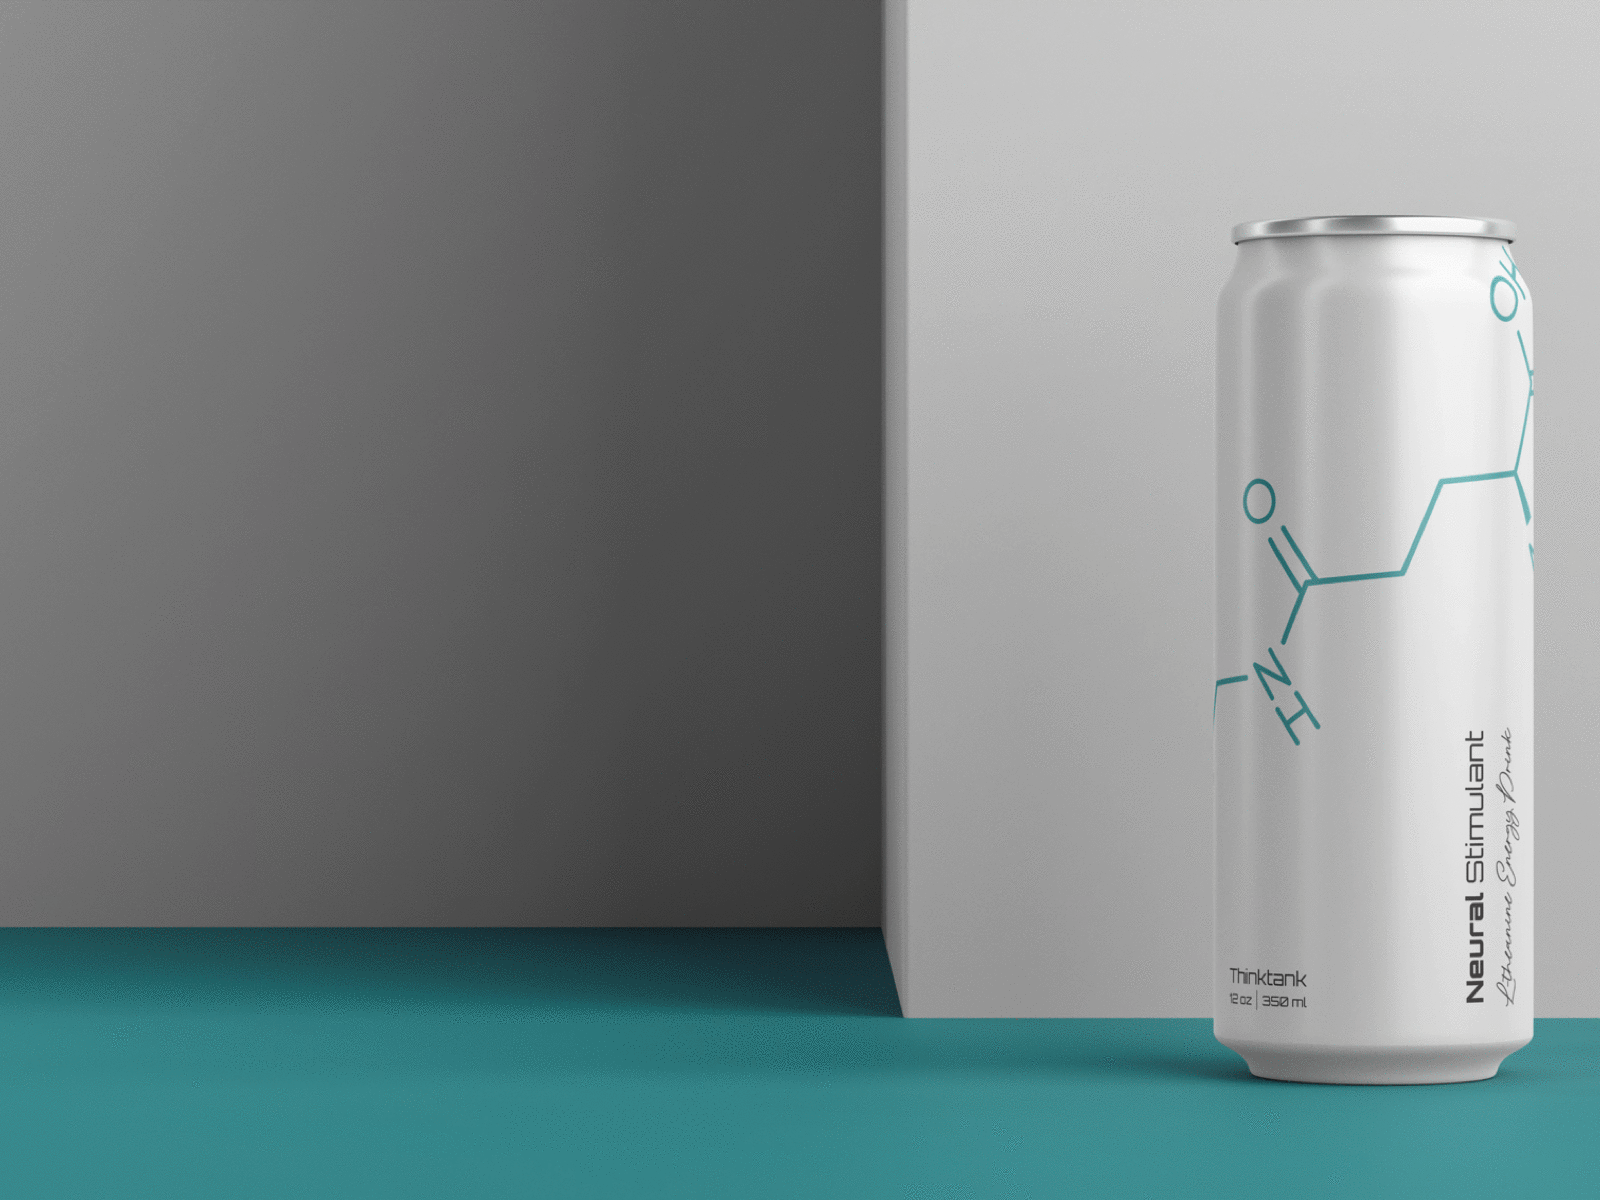 energy drink can design